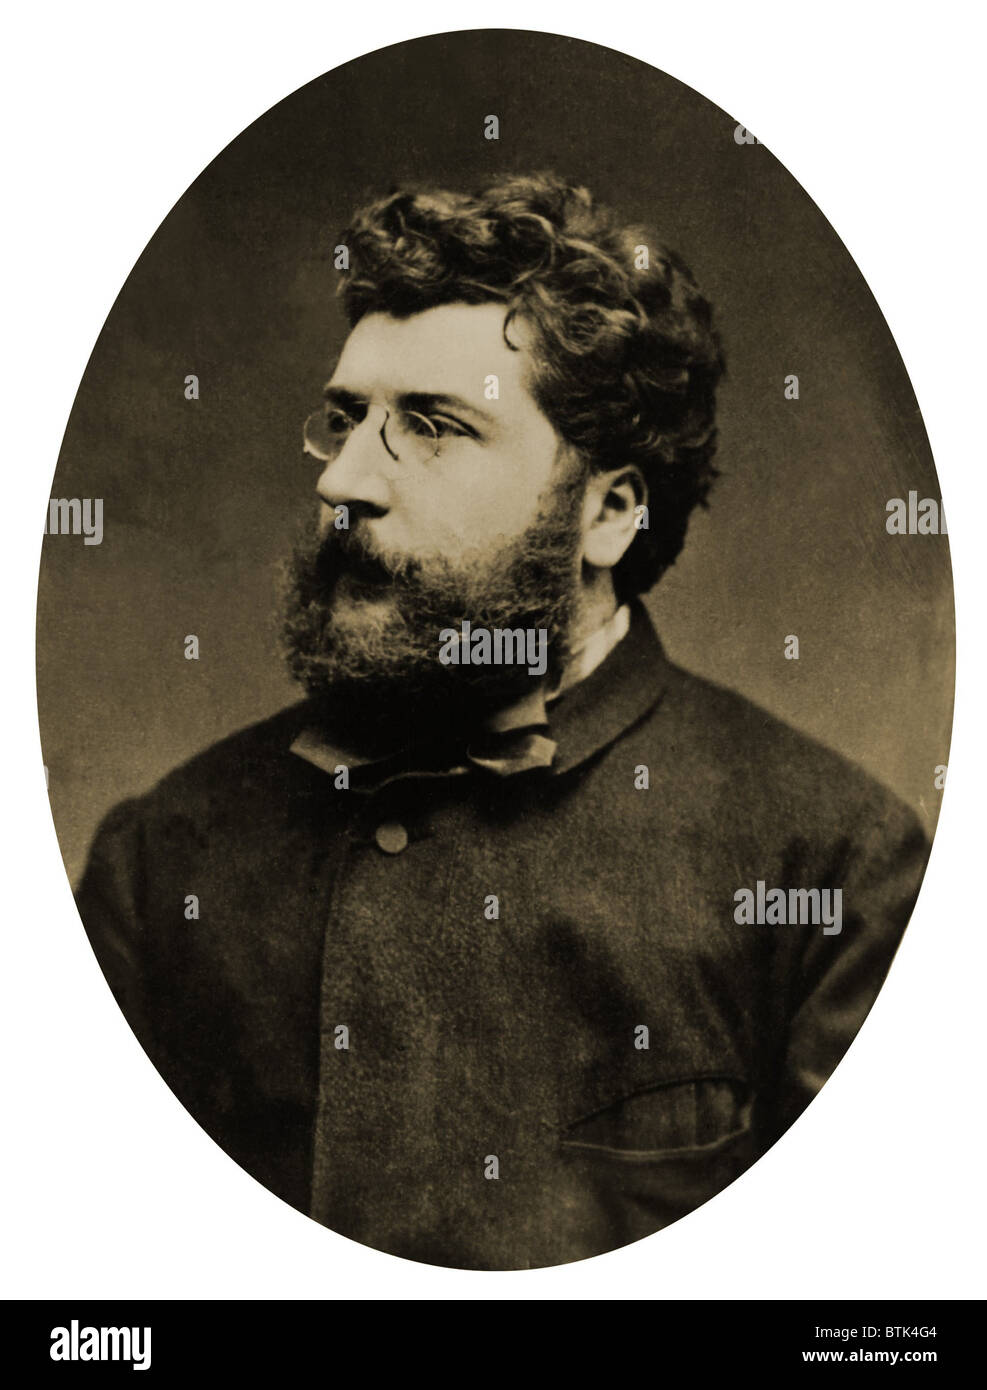 Georges Bizet (1838-1875), French composer based his famous opera, CARMEN (1875), on a story by the contemporary French author Prosper Merimee. Stock Photo